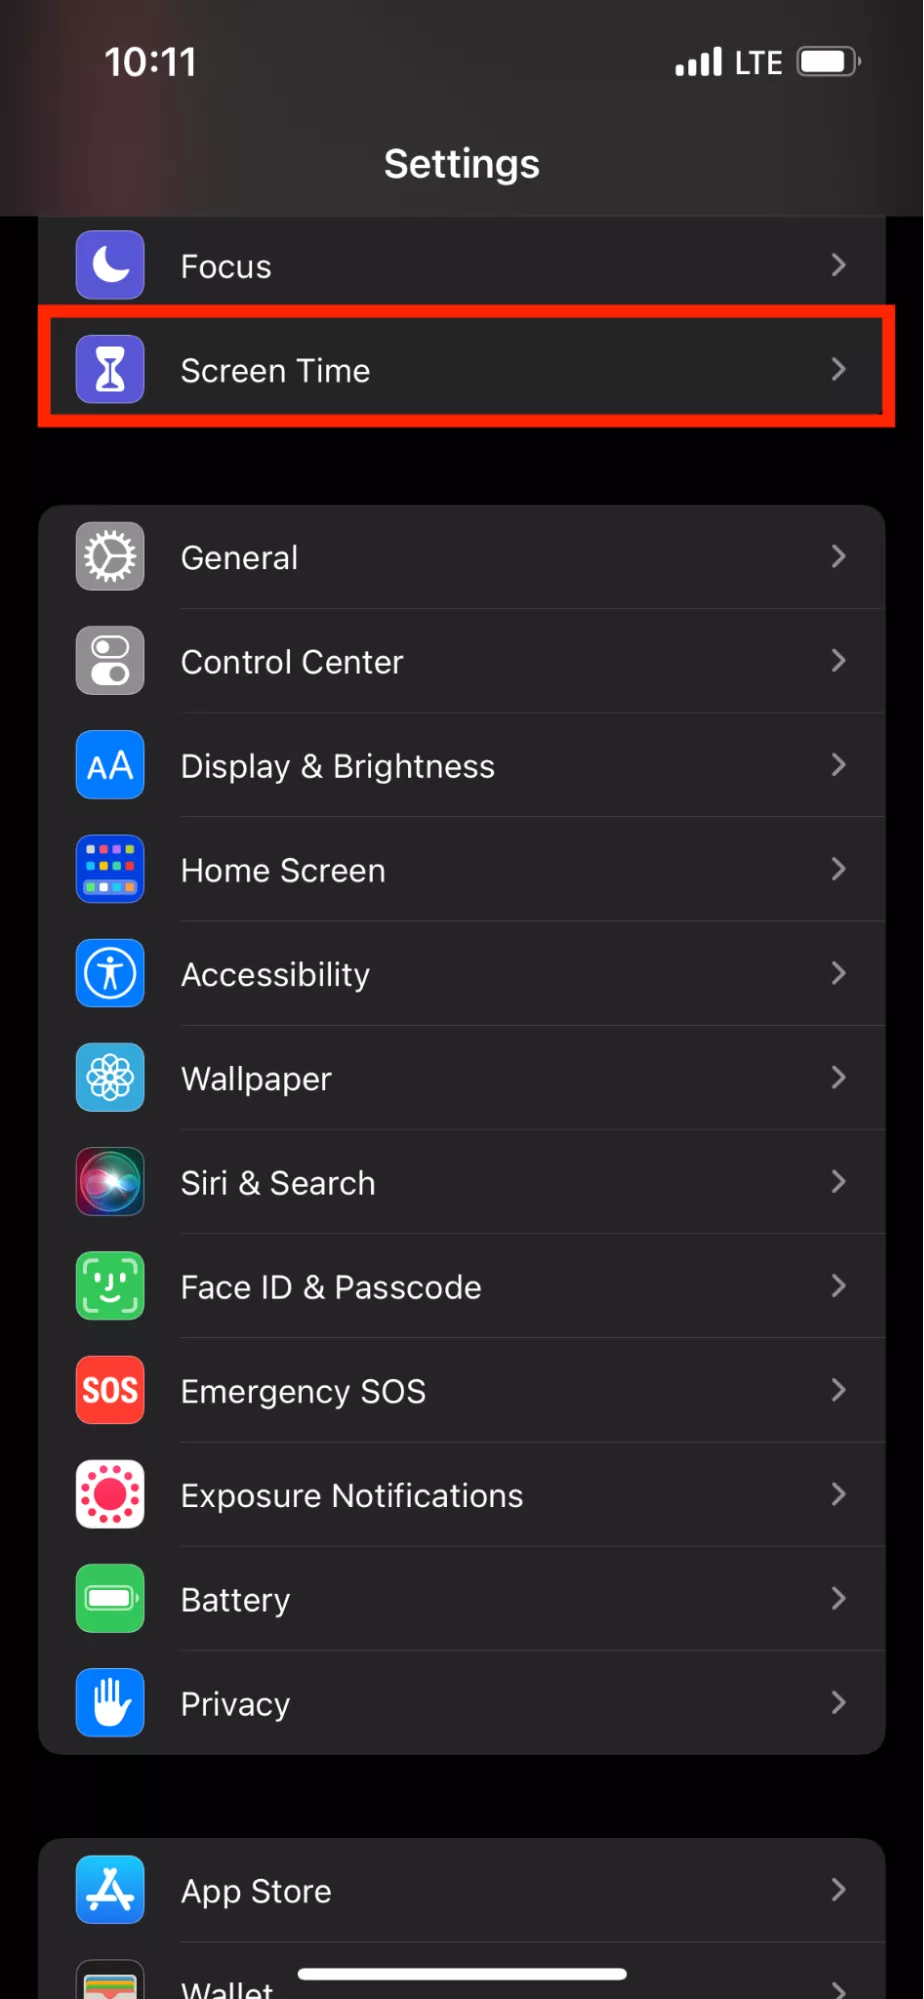 How do I find hidden apps on my iPhone?